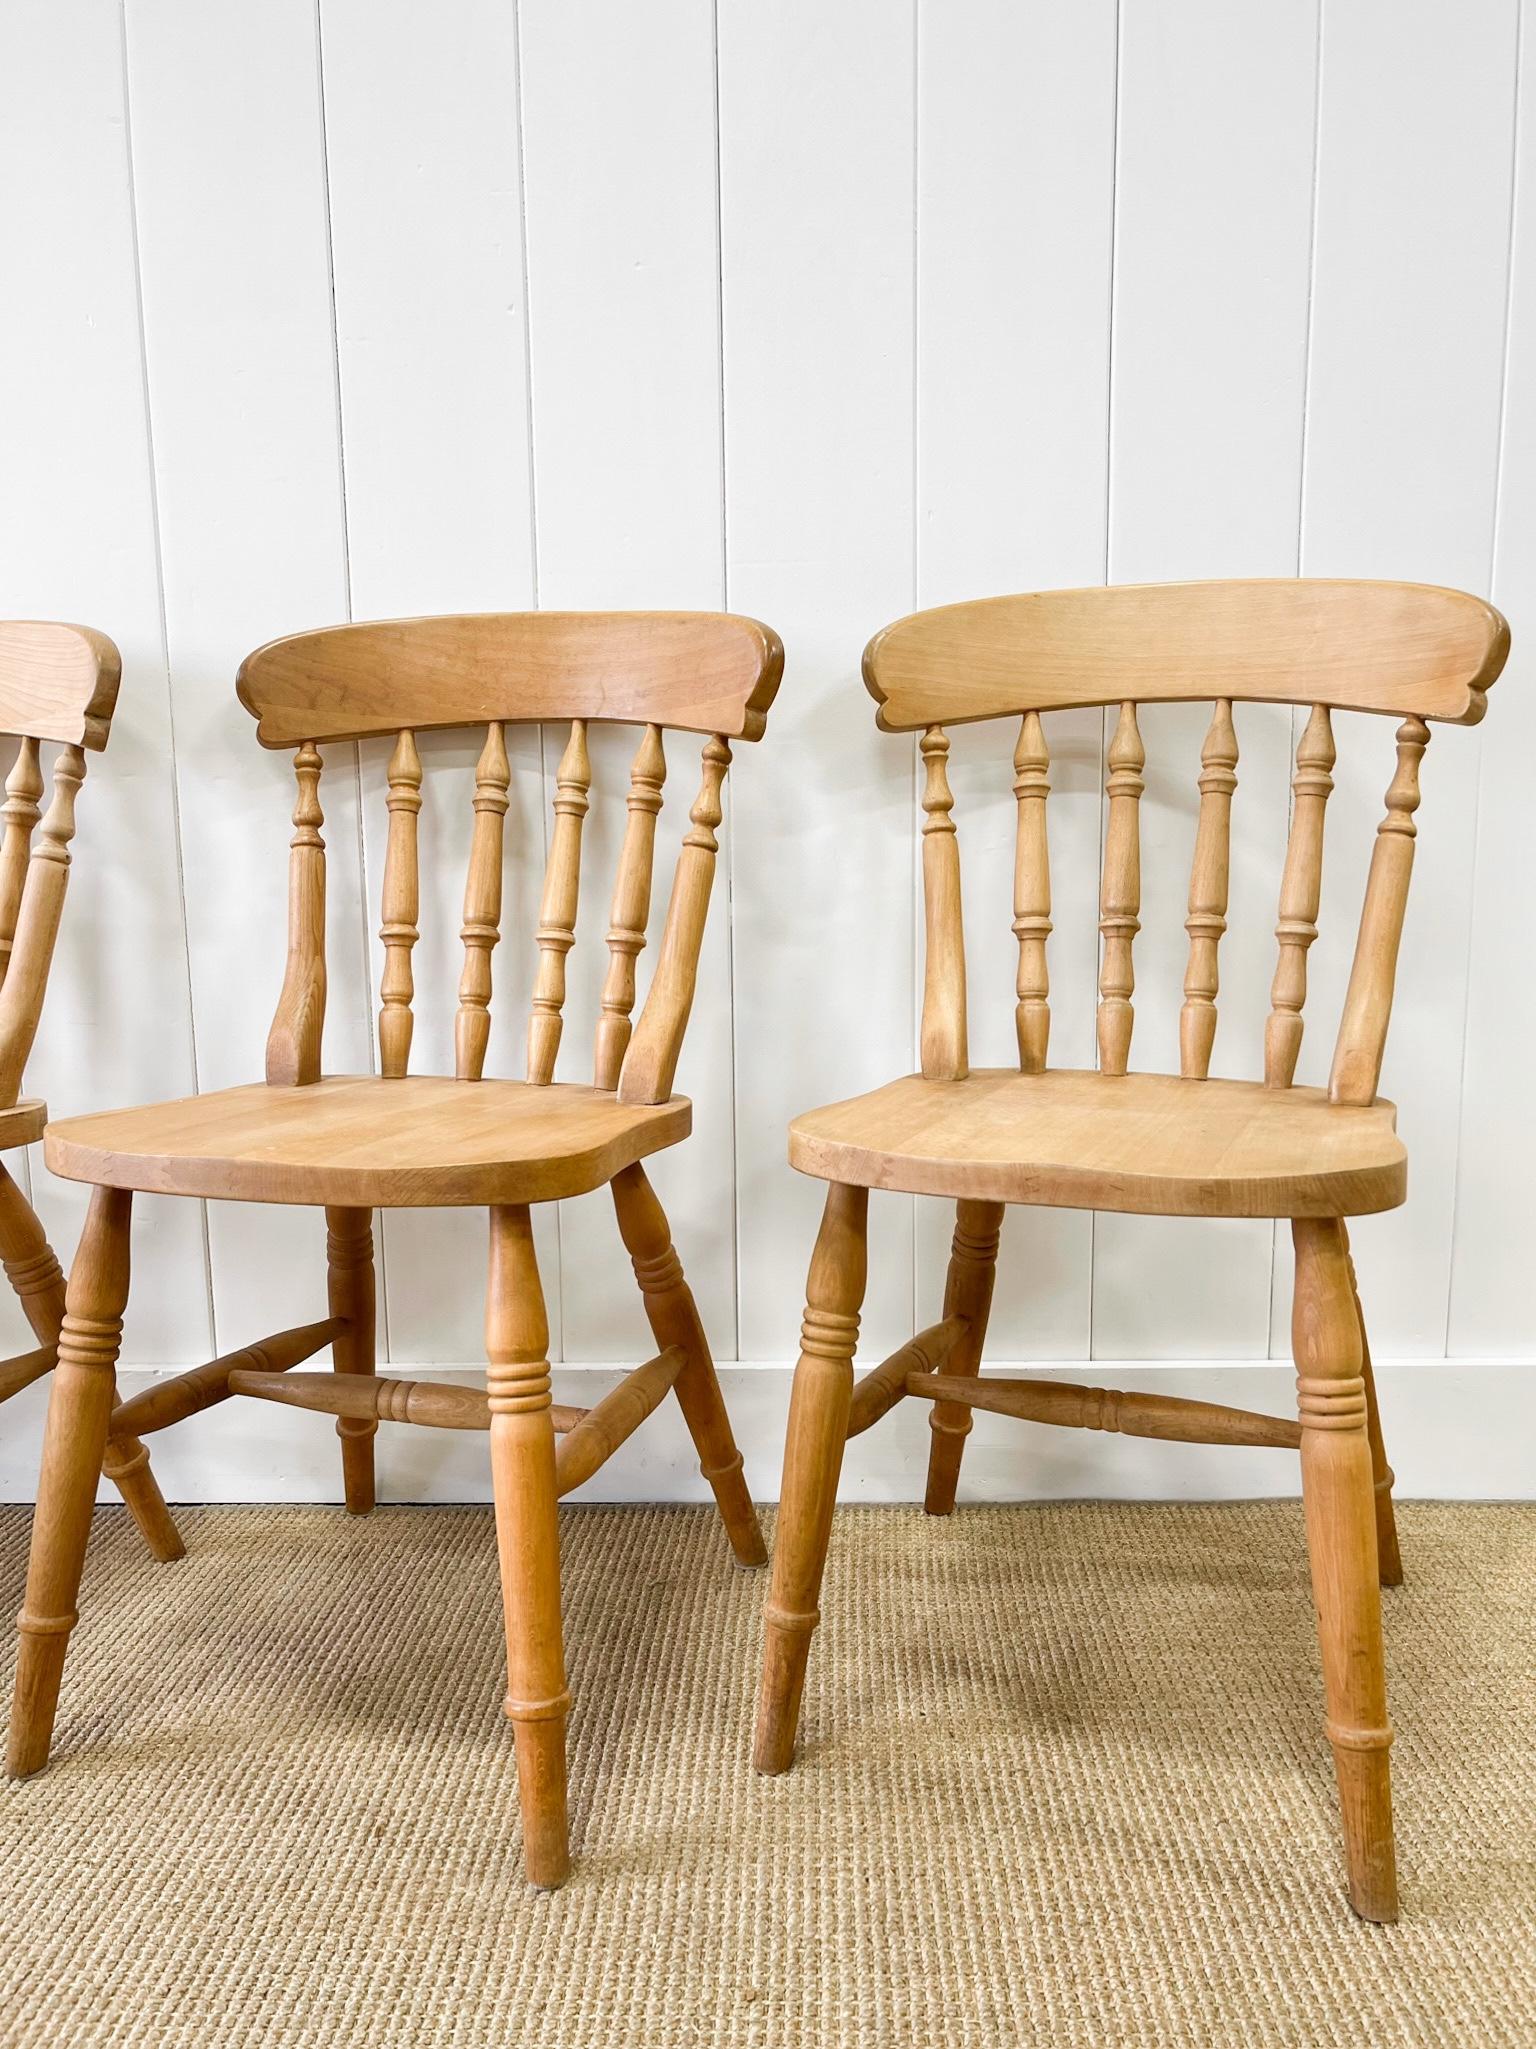 Victorian A Vintage Set of 4 Spindle Back Chairs For Sale